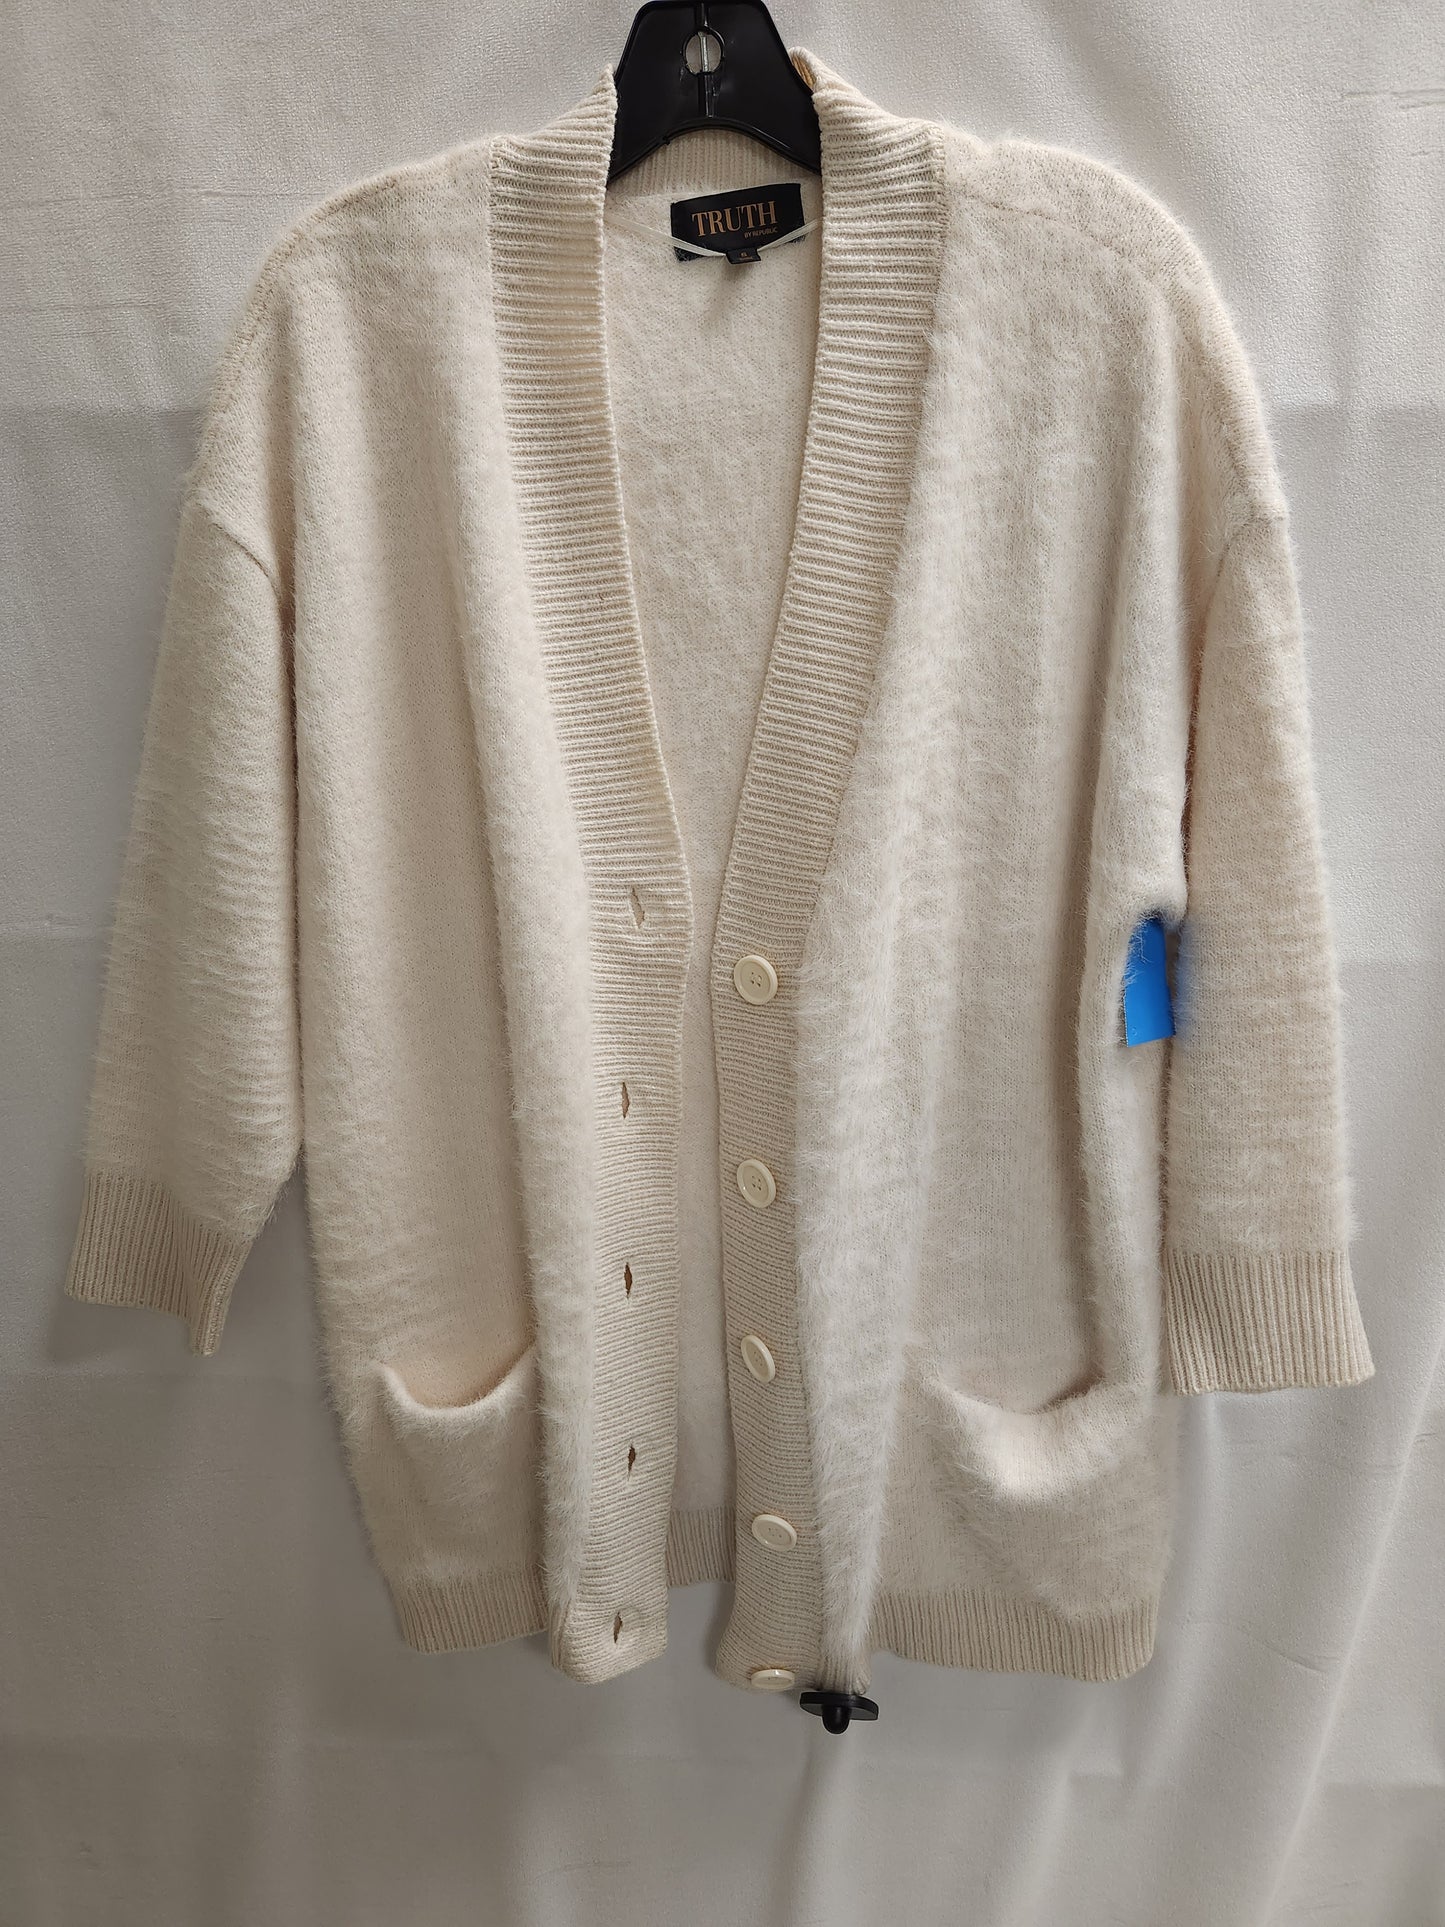 Cardigan By Truth  Size: S